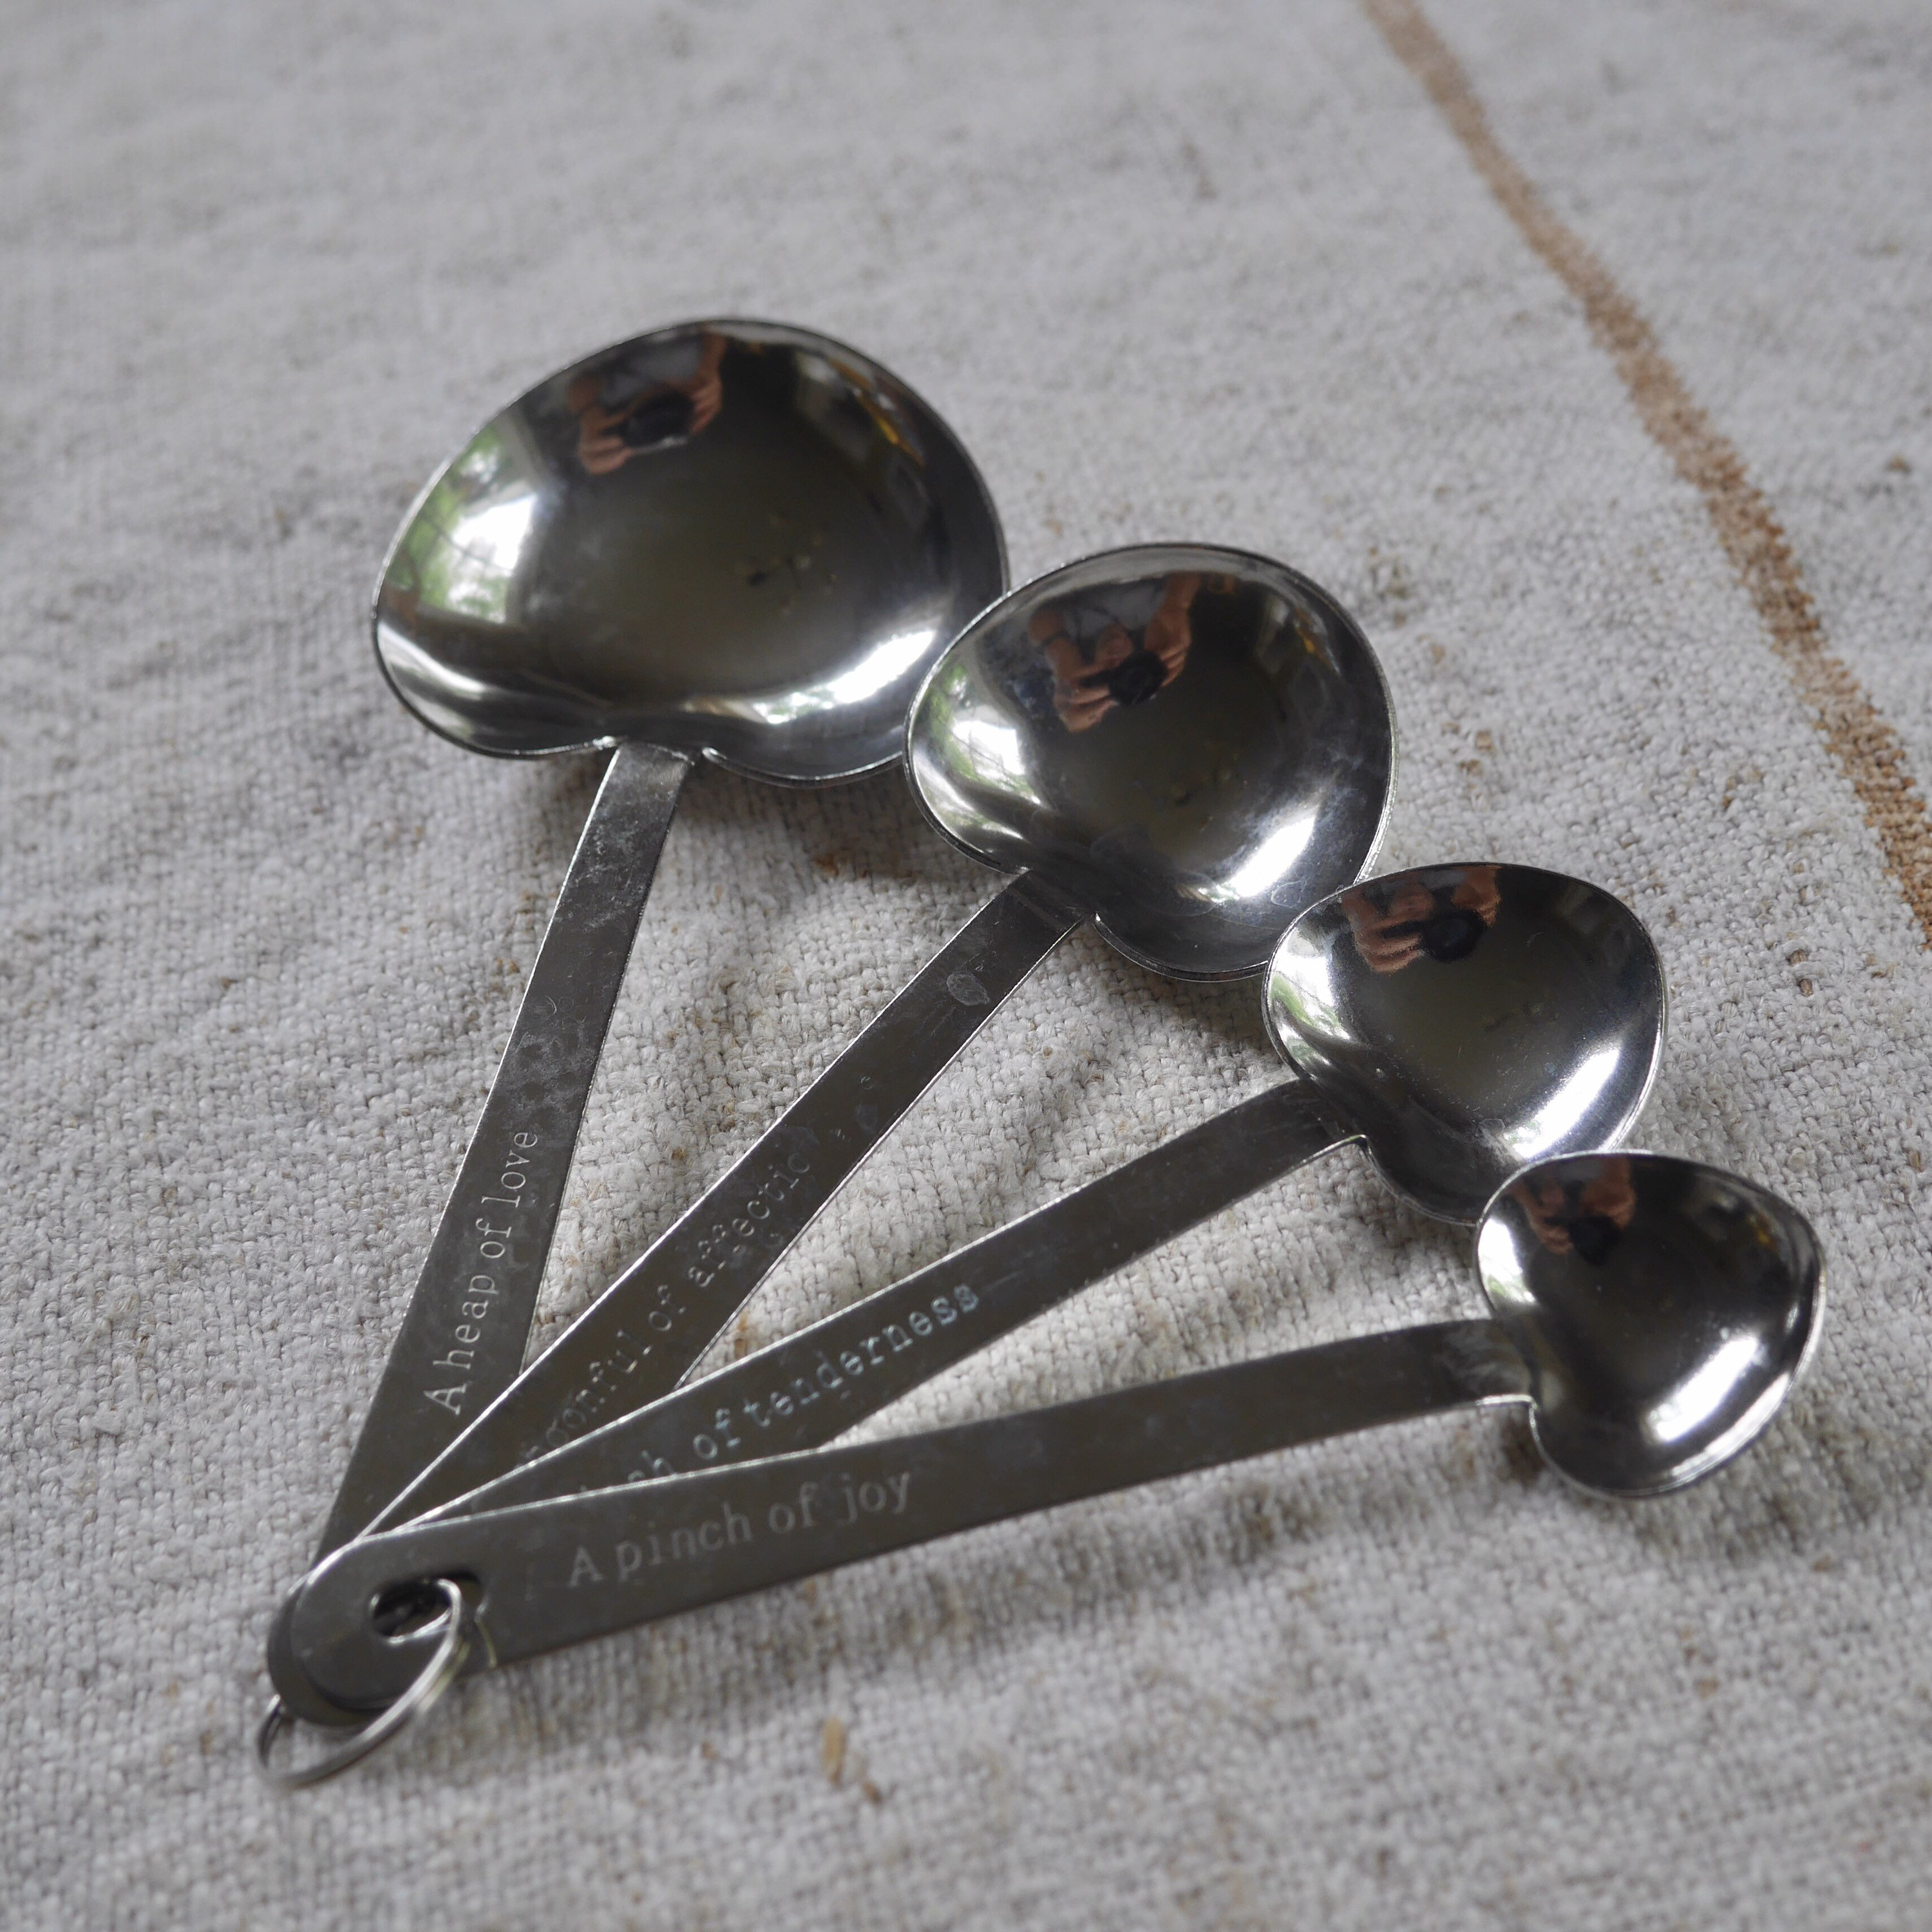 Heart Shaped Measuring Spoons, A Pinch of Joy, A Dash of Tenderness, A  Spoonful of Affection and a Heap of Love 